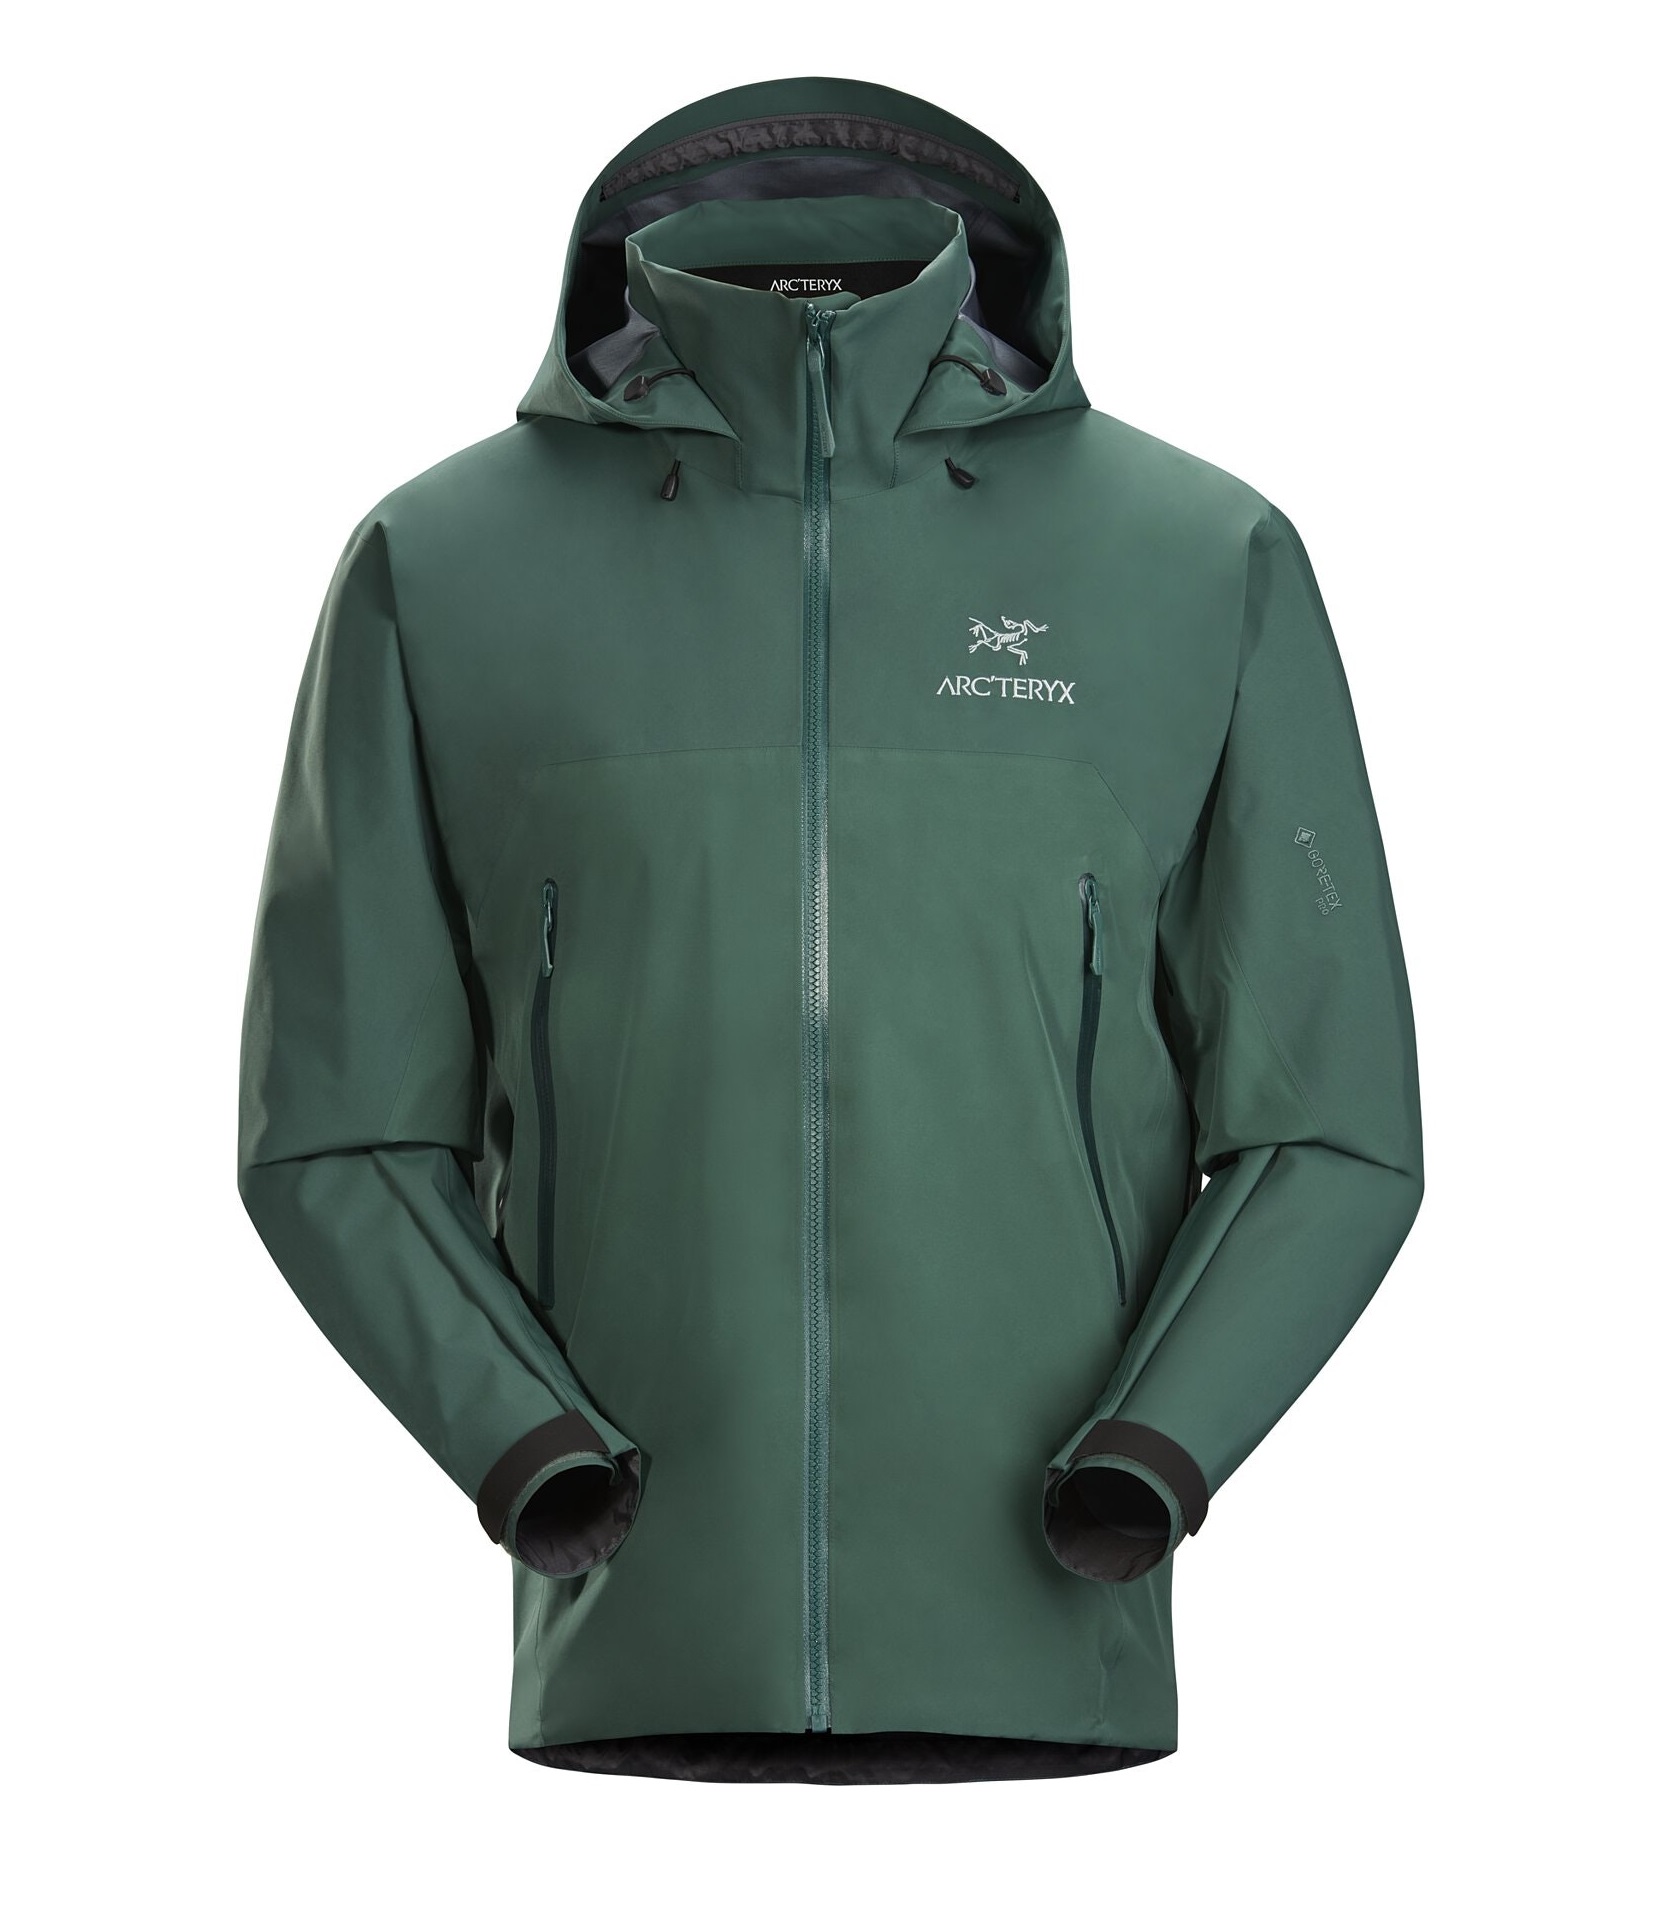 olvidadizo Fragante Arena The Best Gore-Tex Jackets to Buy in 2023 - Best Hiking